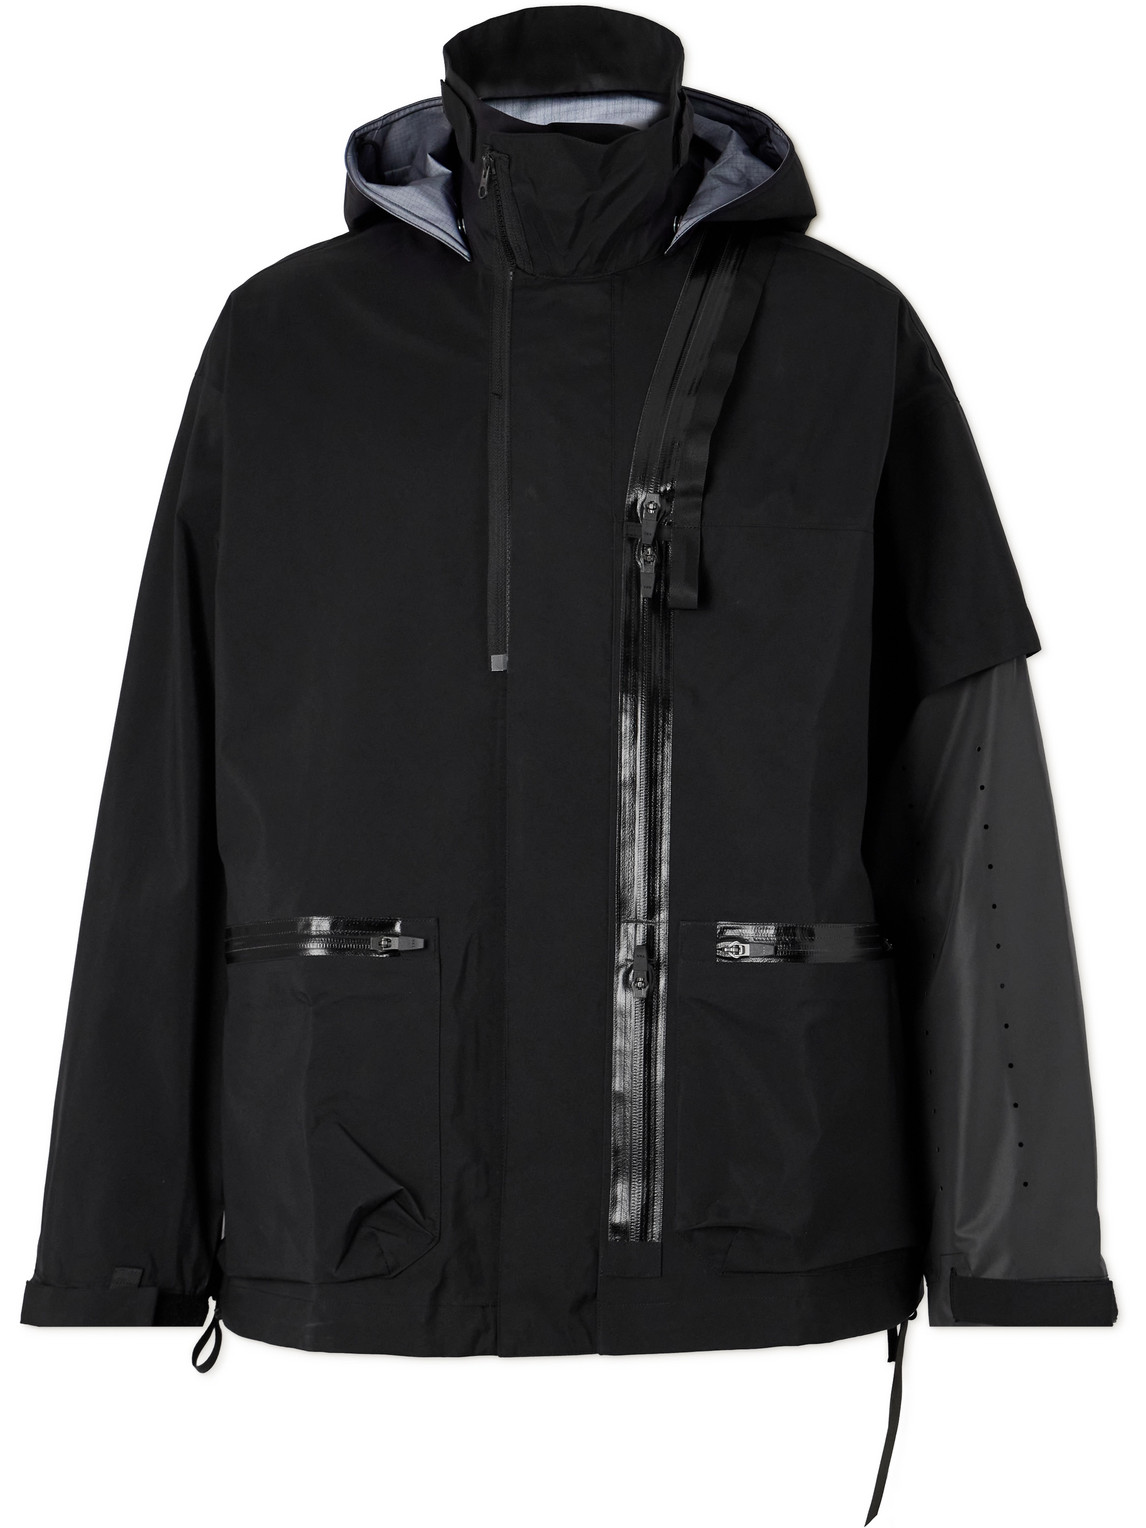 ACRONYM CONVERTIBLE 3L GORE-TEX® PRO HOODED JACKET